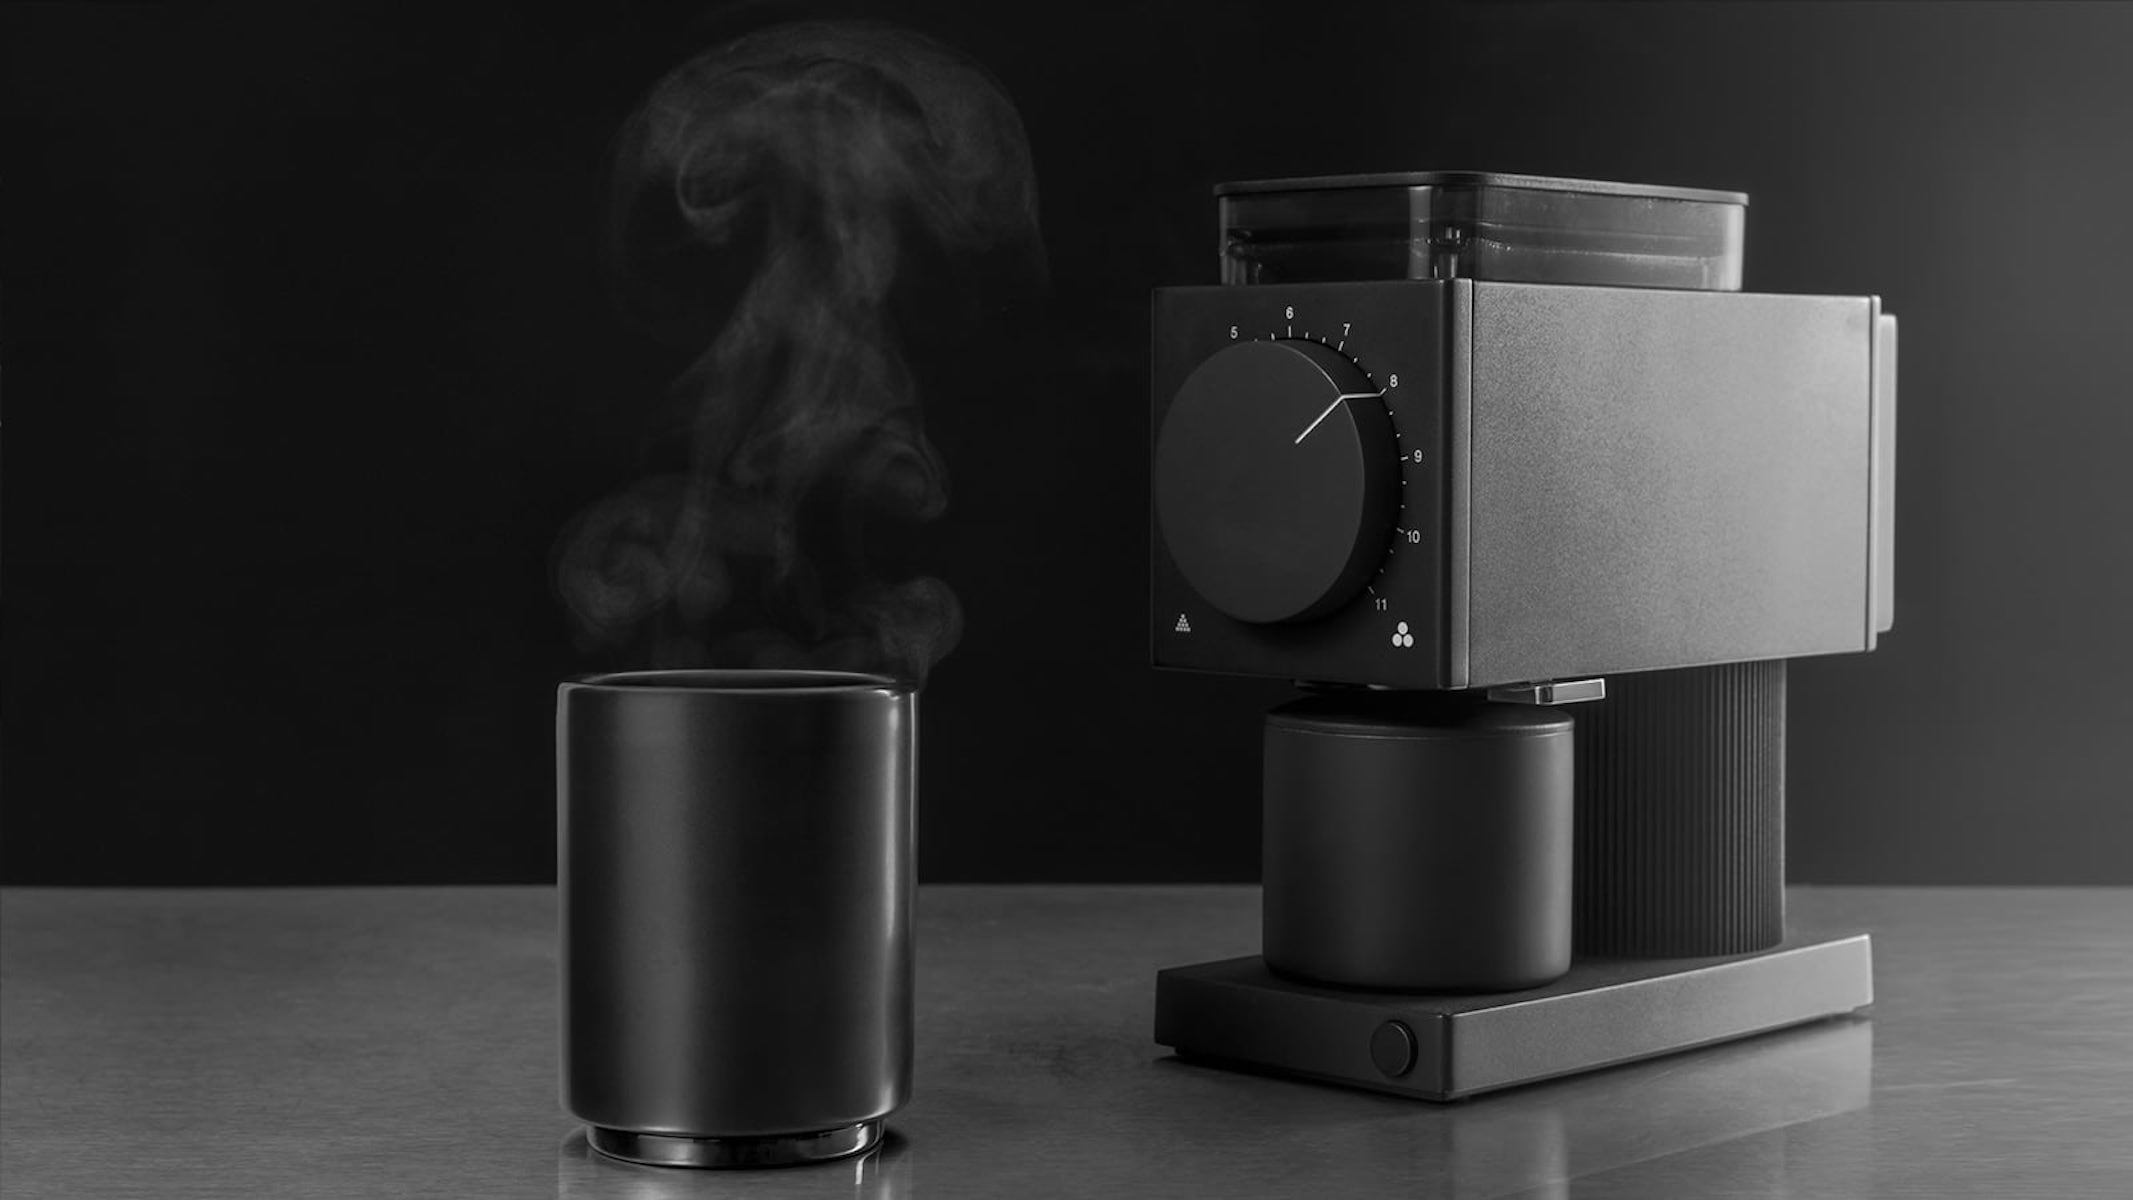 https://thegadgetflow.com/wp-content/uploads/2021/02/Best-coffee-grinders-for-the-ultimate-coffee-experience.jpg